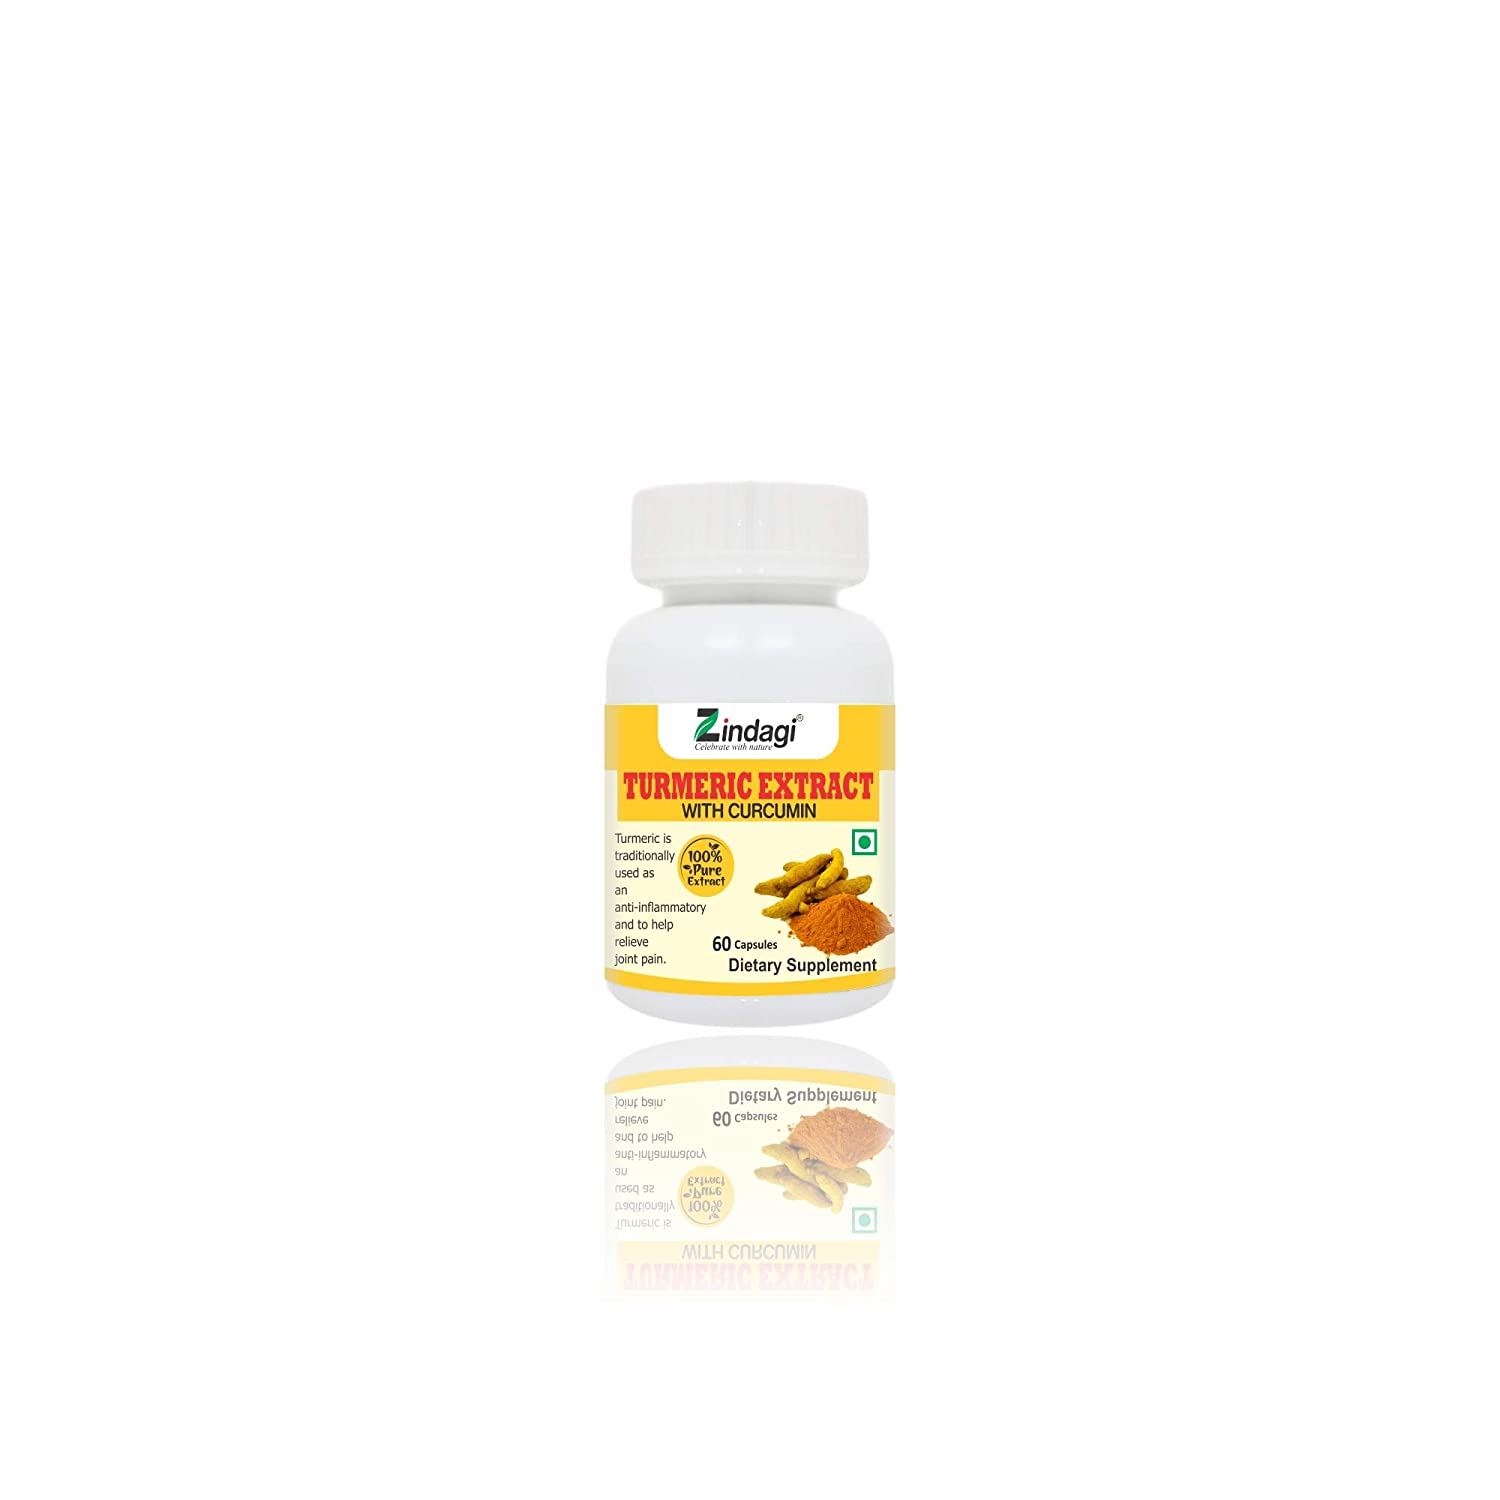 Buy Zindagi Turmeric Extract Capsules With Curcumin - Maintain Healthy Joints - Powerful Antioxidant(60 Capsules) at Best Price Online